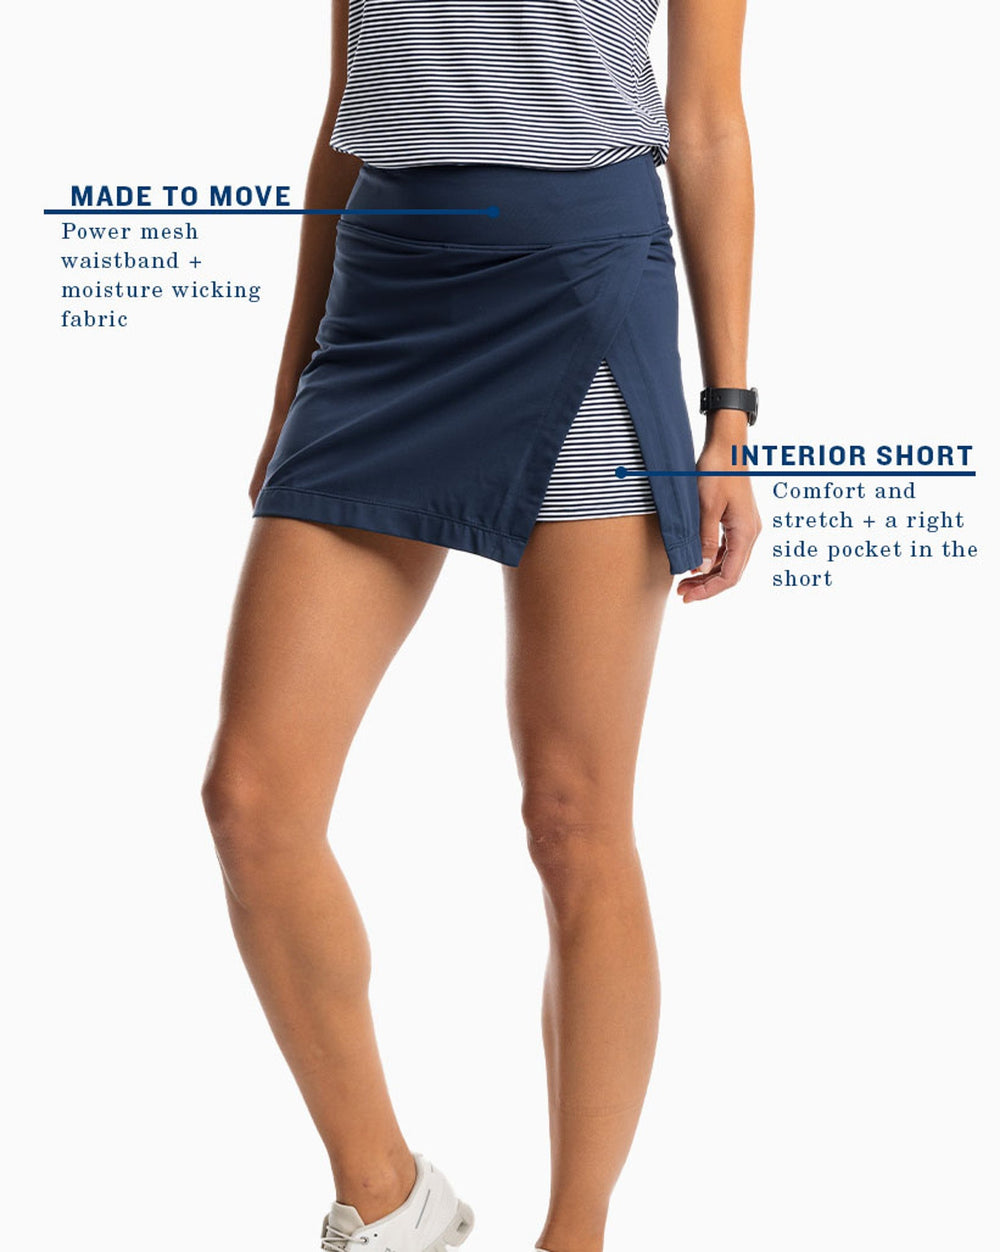 The model highlights view of the Women's Aveiro Performance Skort by Southern Tide - True Navy